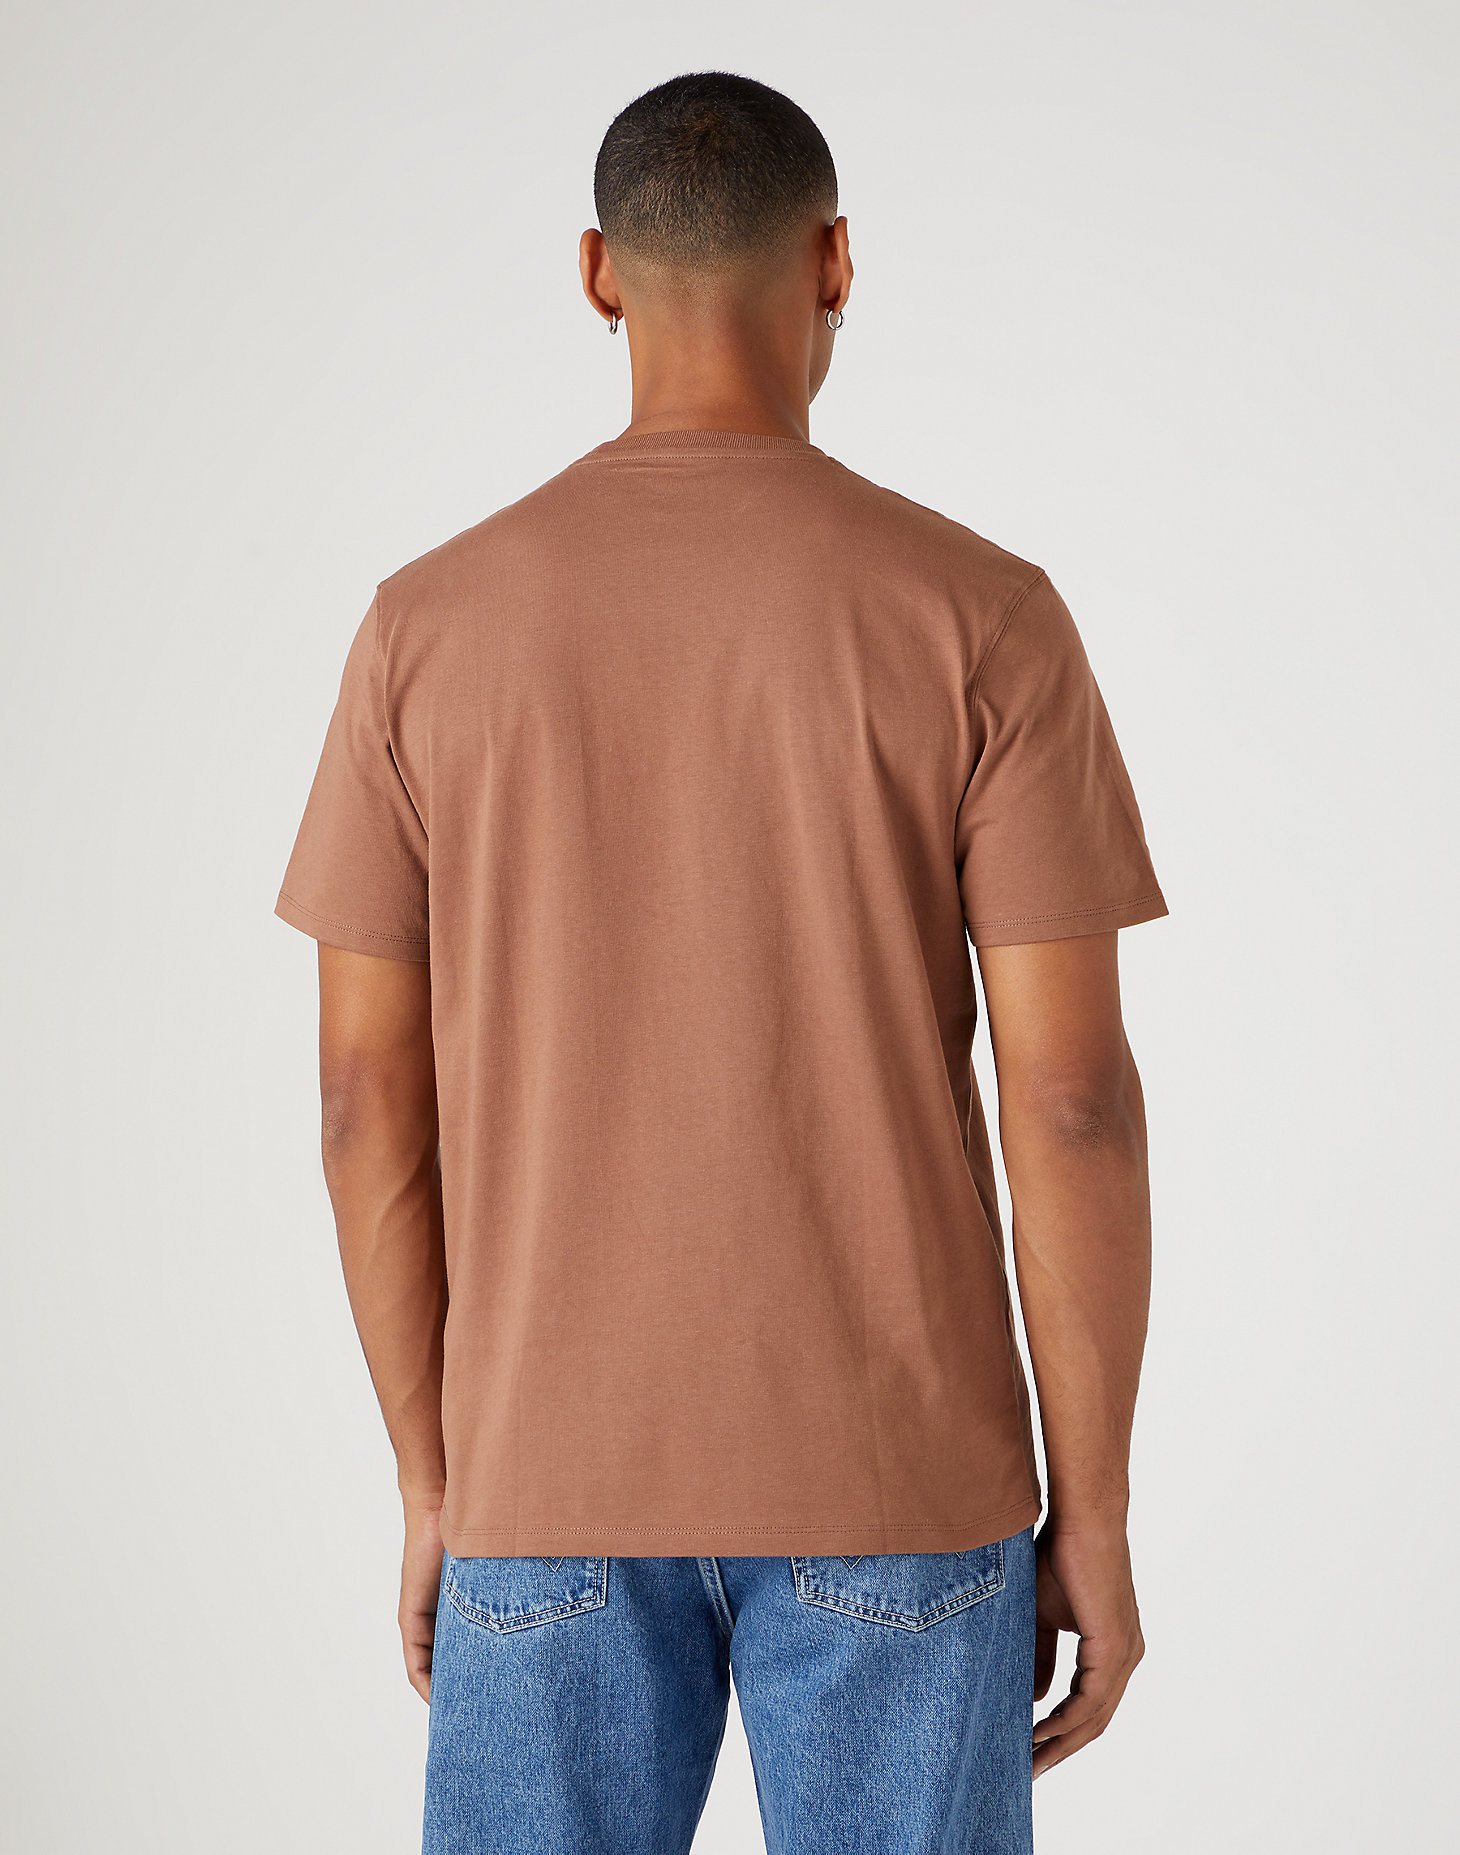 Pocket Tee in Cappuccino alternative view 2